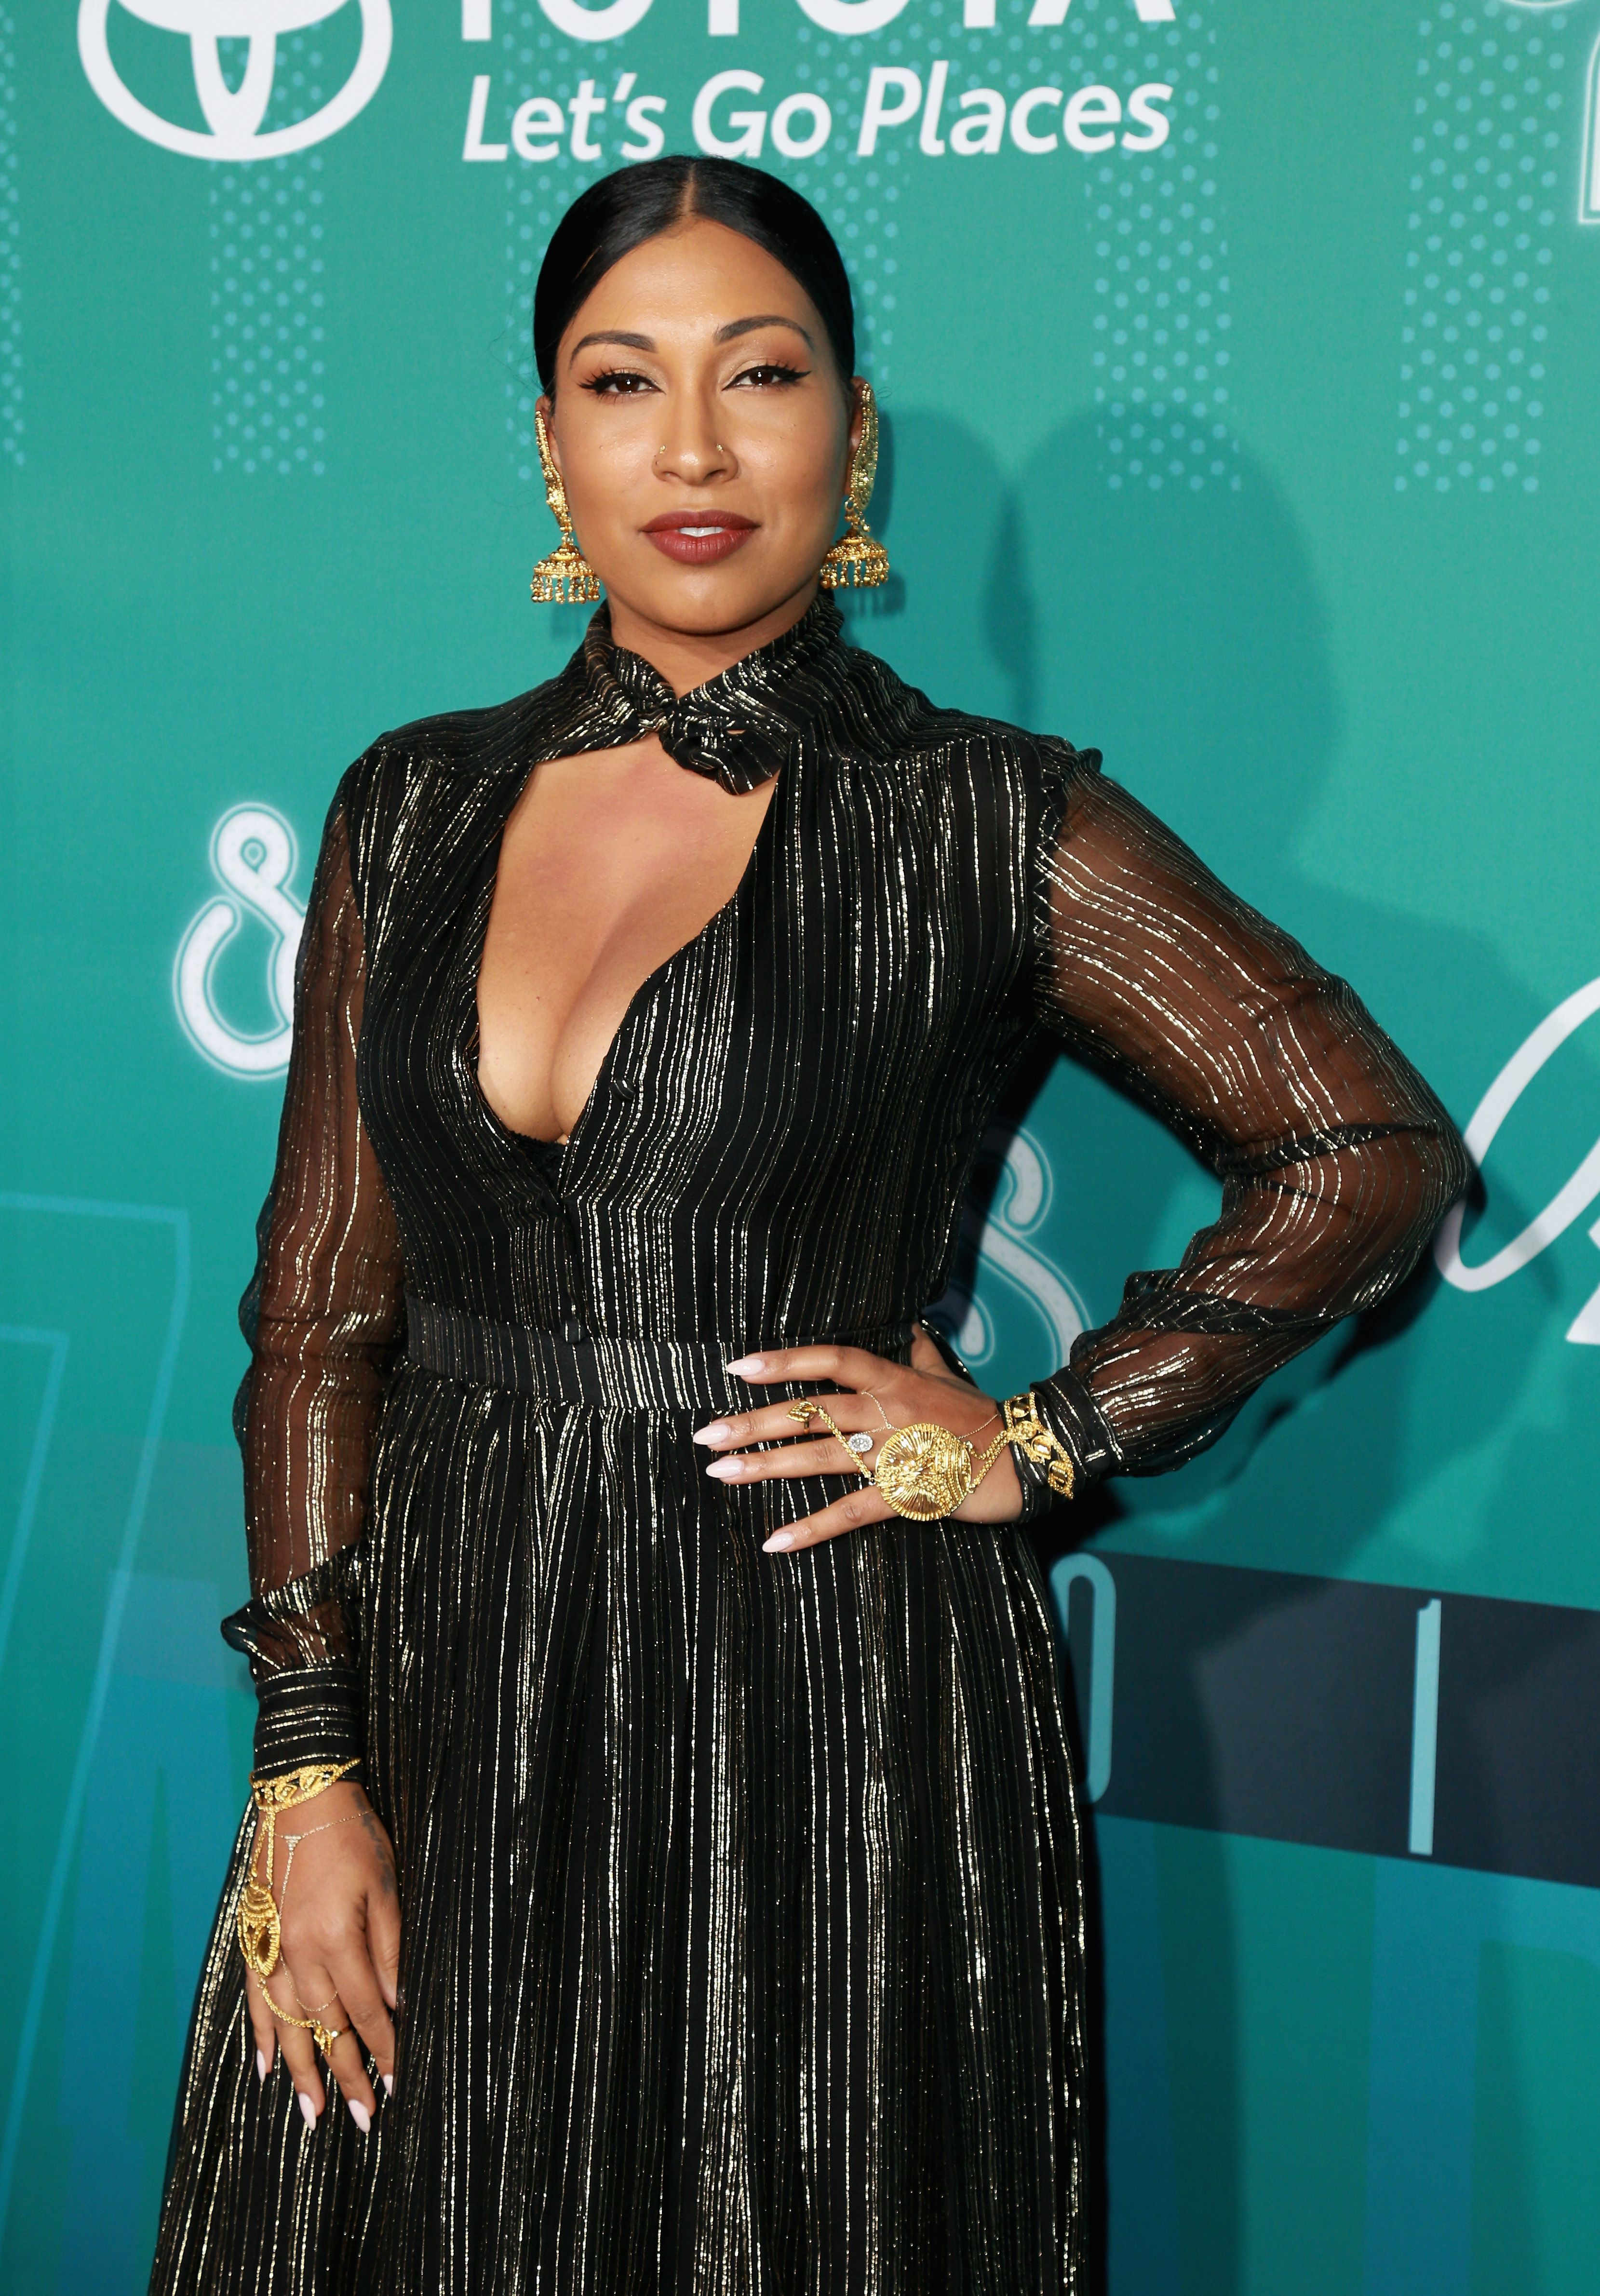 Melanie Fiona attends the 2017 Soul Train Awards, presented by BET, at the Orleans Arena on November 5, 2017 in Las Vegas, Nevada. | Source: Getty Images